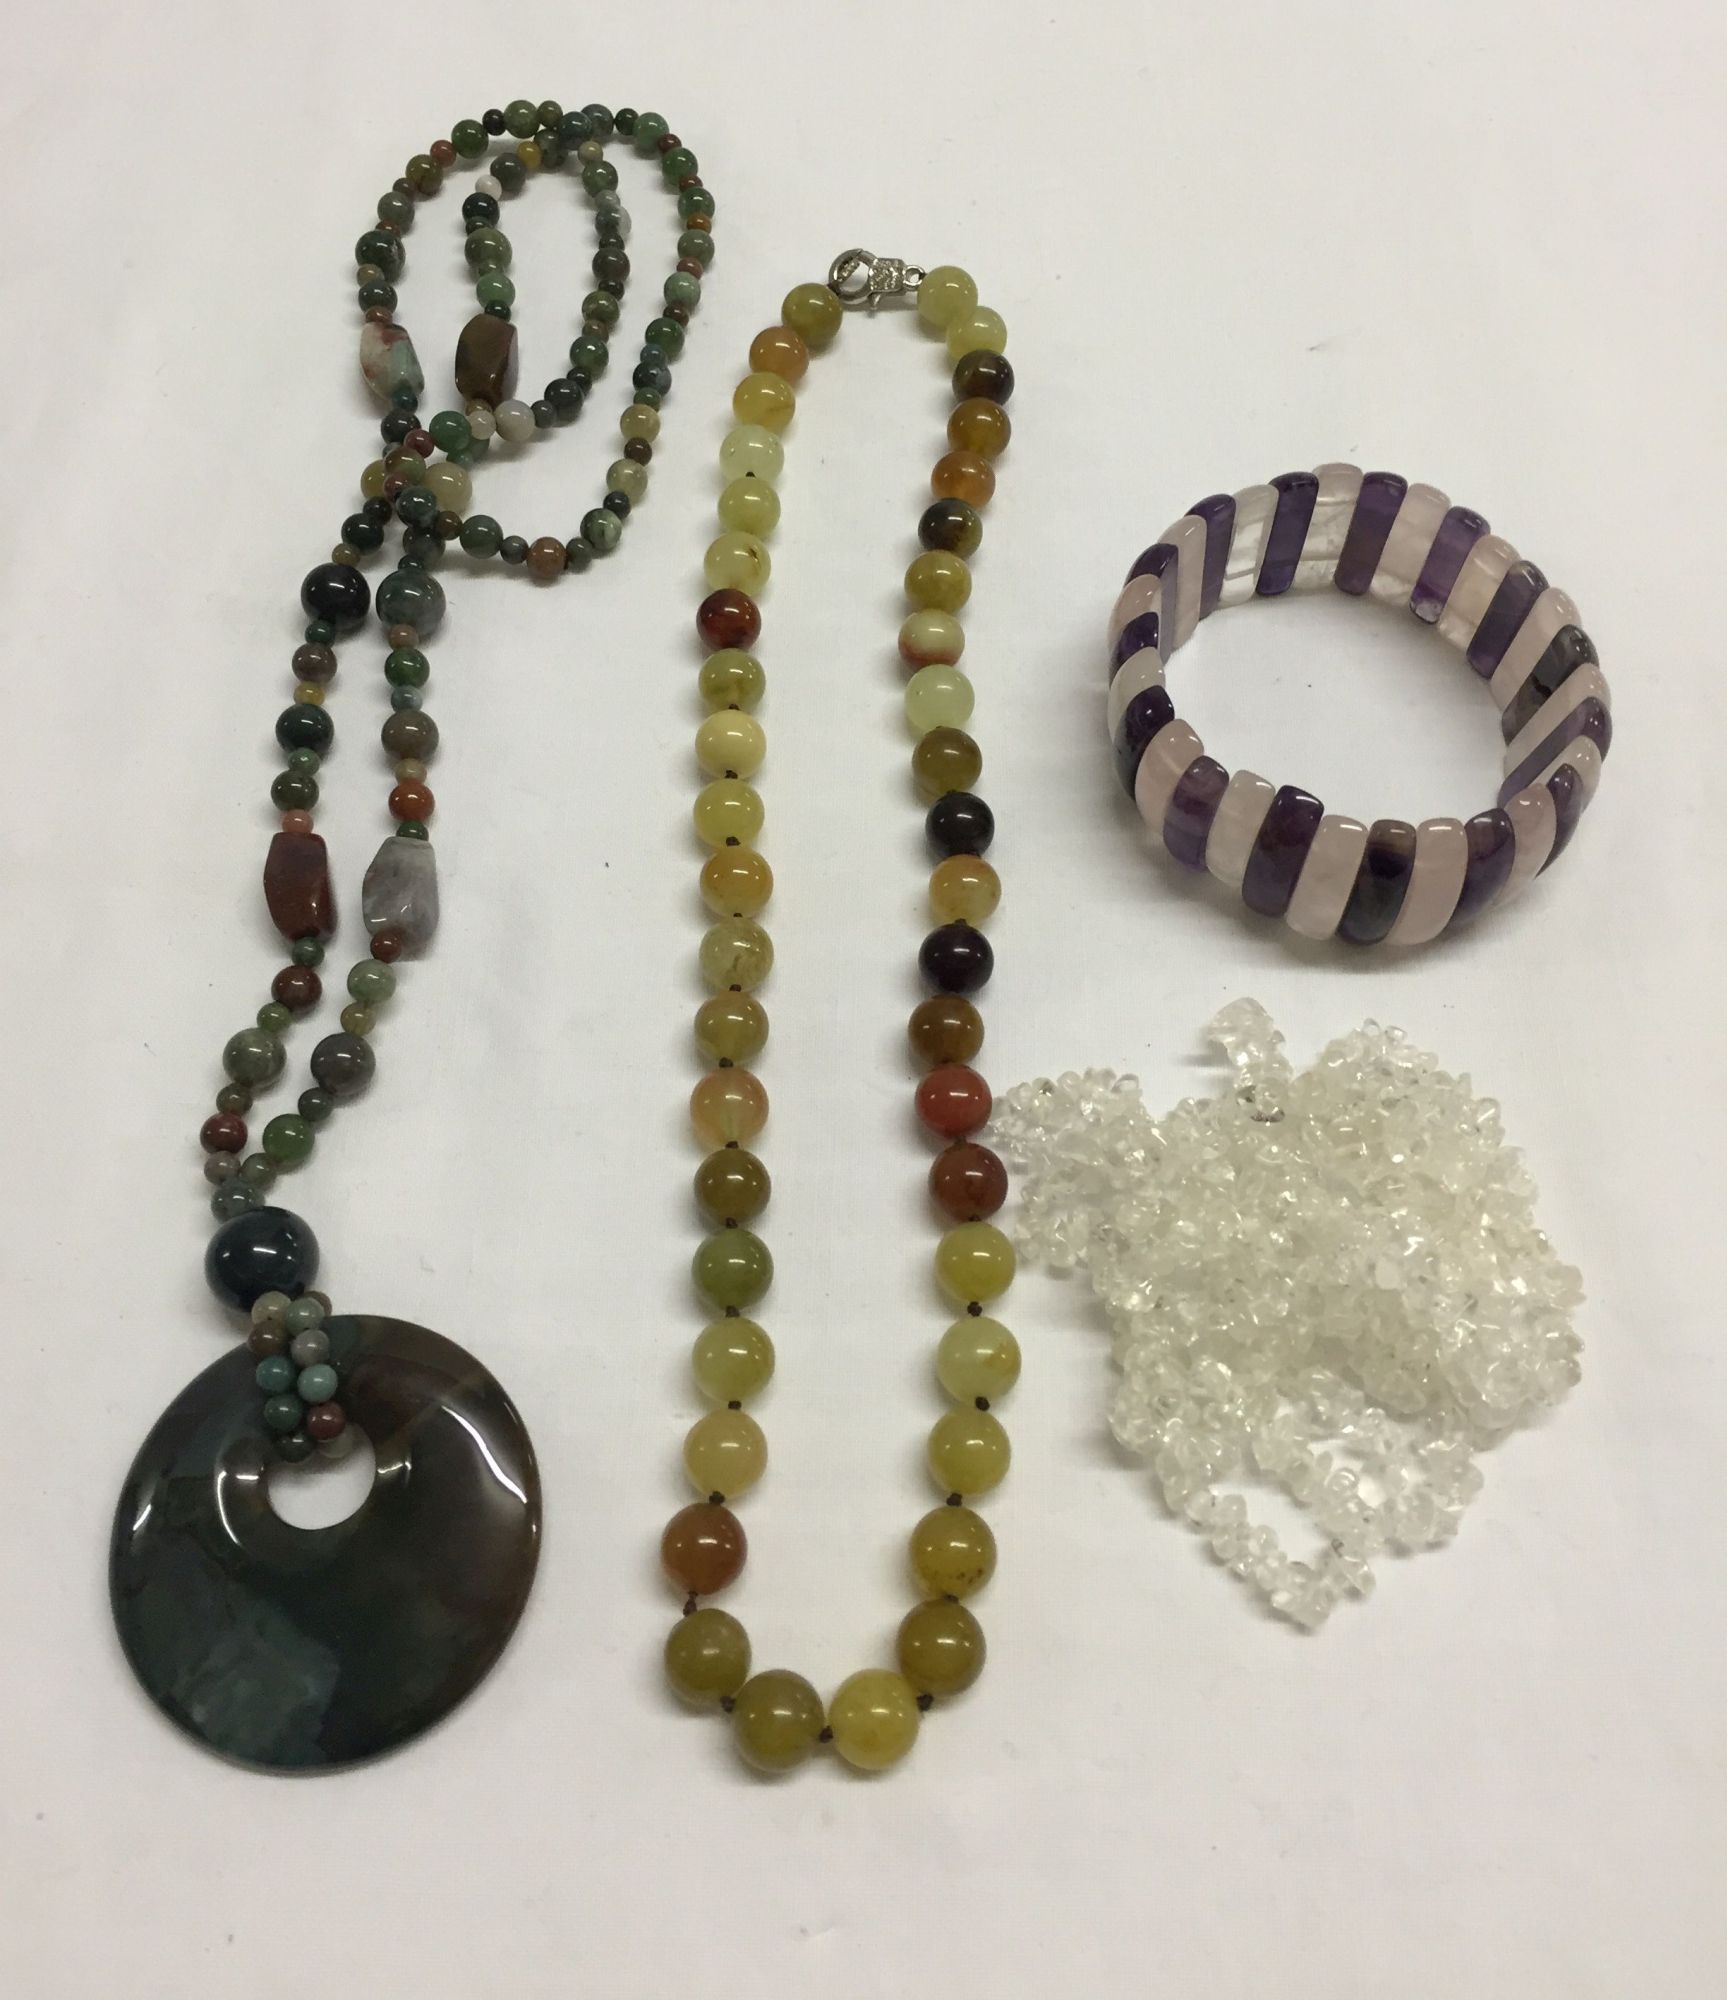 2 agate & natural stone necklaces together with a quartz necklace and an amethyst rose quartz